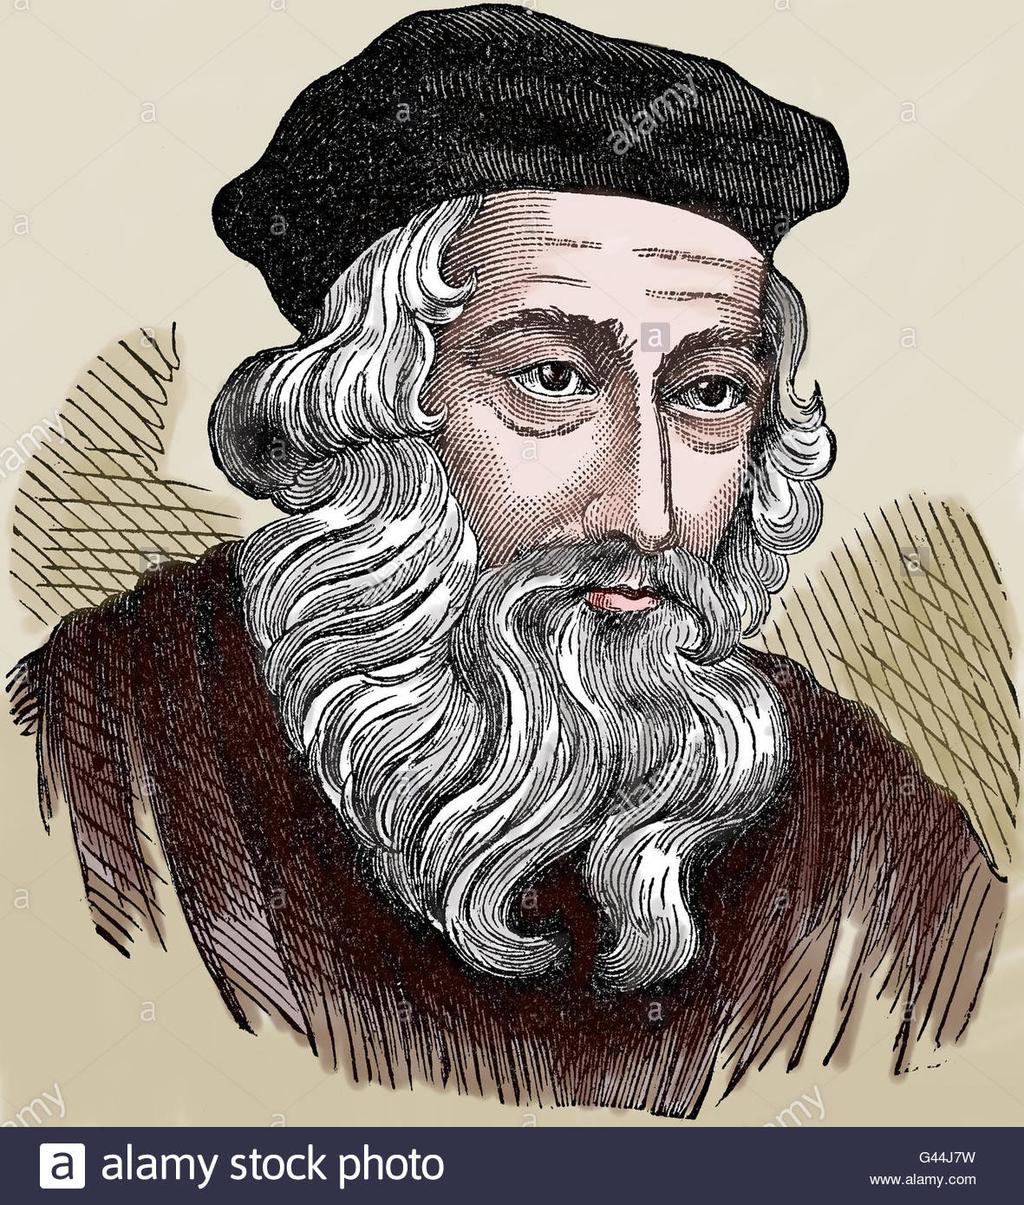 The Reforma3on John Wycliffe ~1325-1384 During the distrac2ons of the Babylonian Cap2vity of the Church, an English Scholas2c theologian/ professor at Oxford seminary arose.